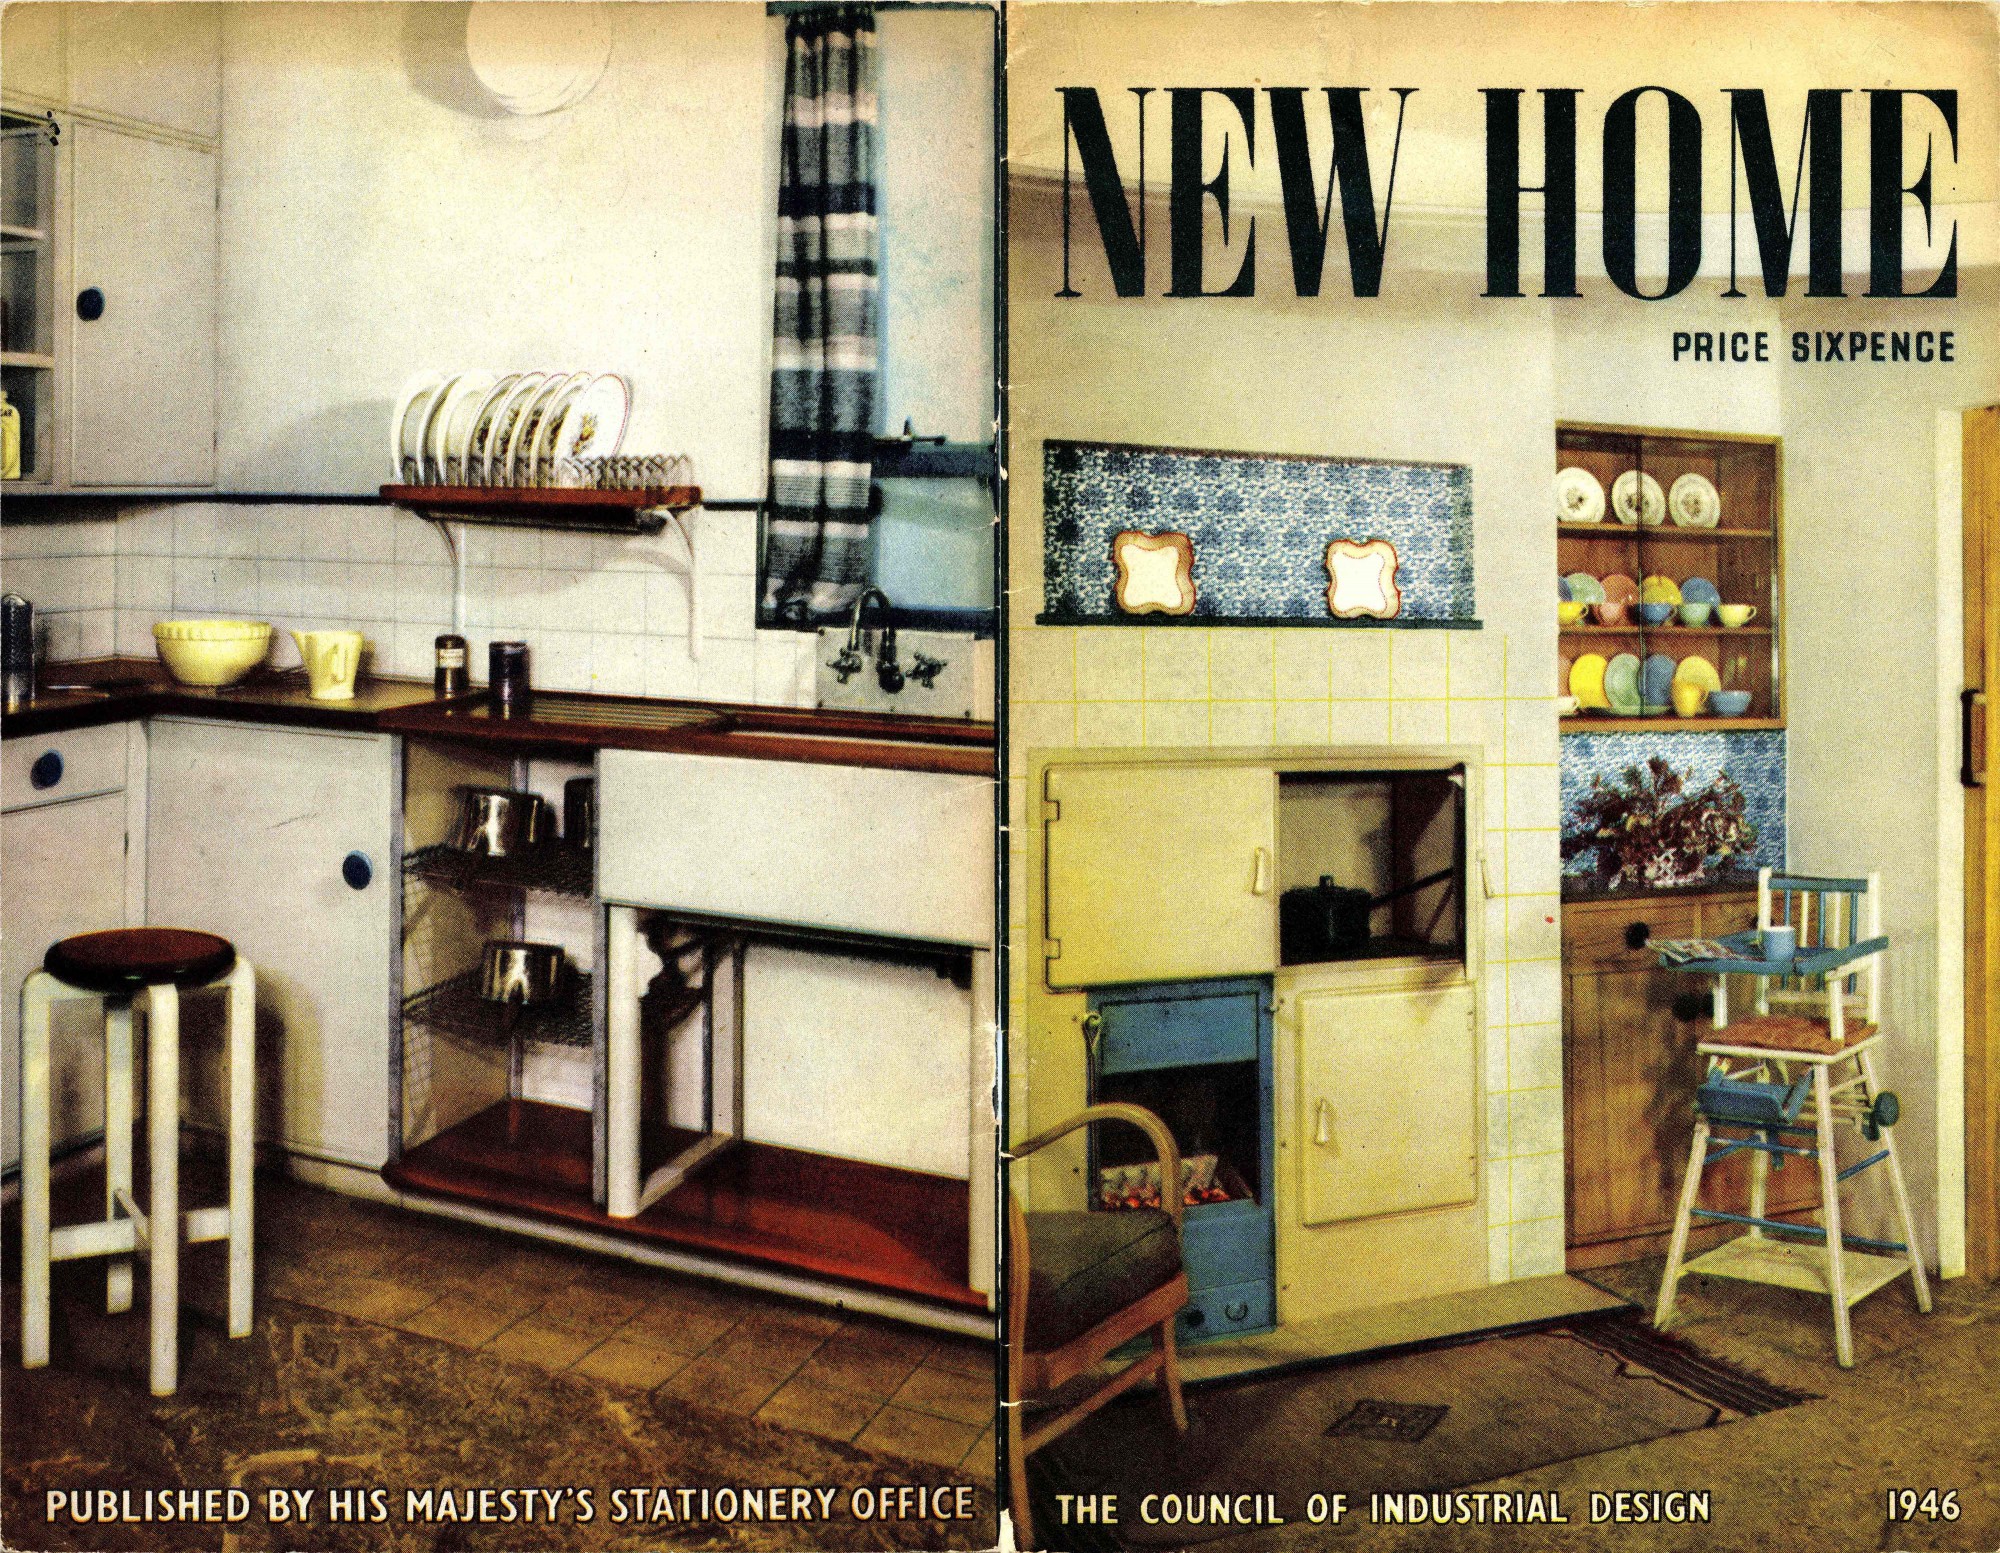 Image showing the front and back cover of New Home magazine (1946) depicting a colour image of a living room setting in the front cover, and a kitchen setting on the back cover